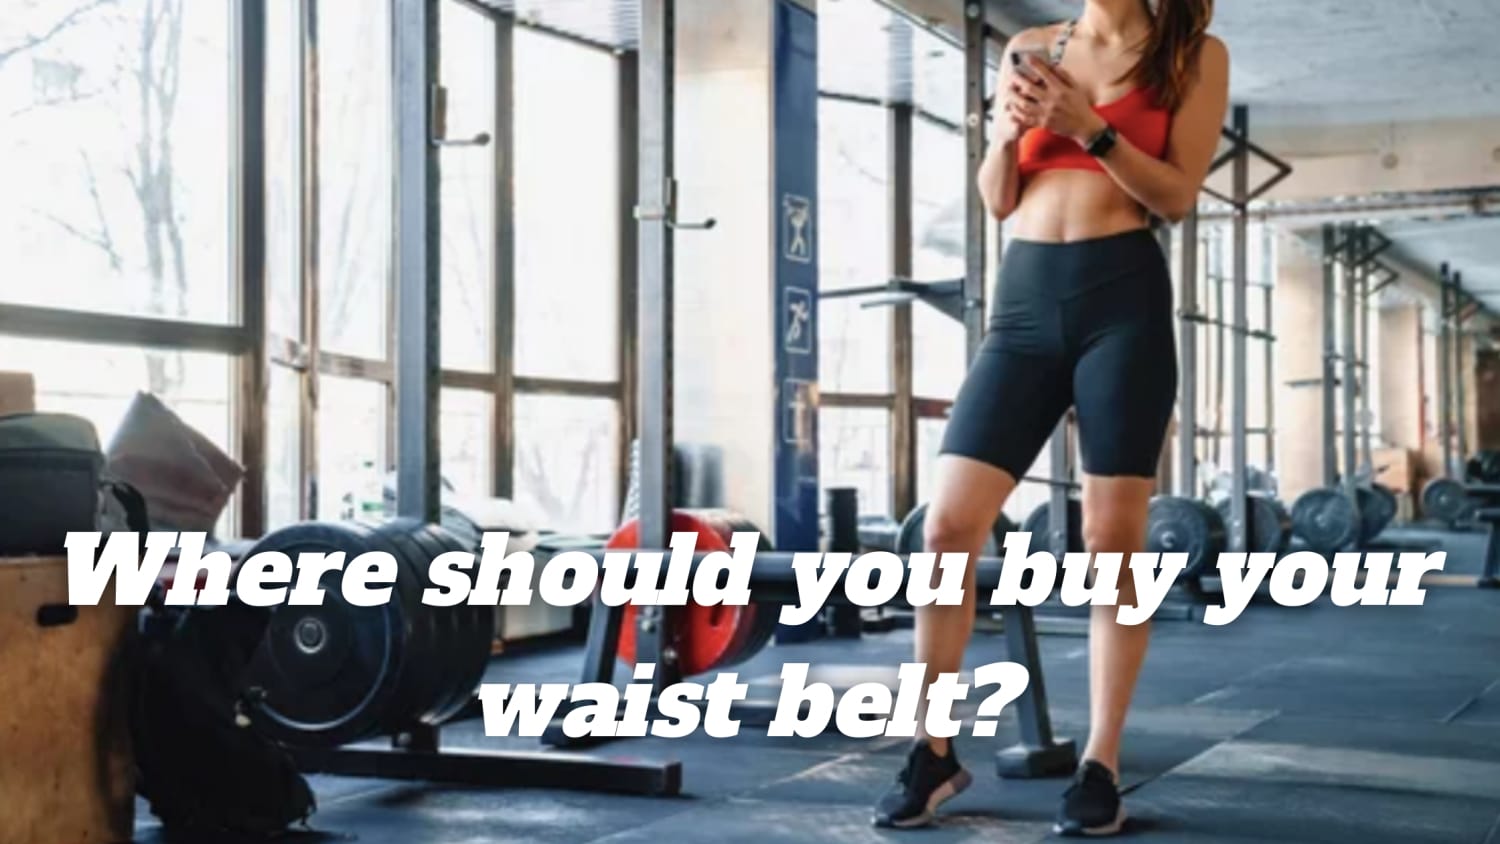 Where should you buy your waist belt?